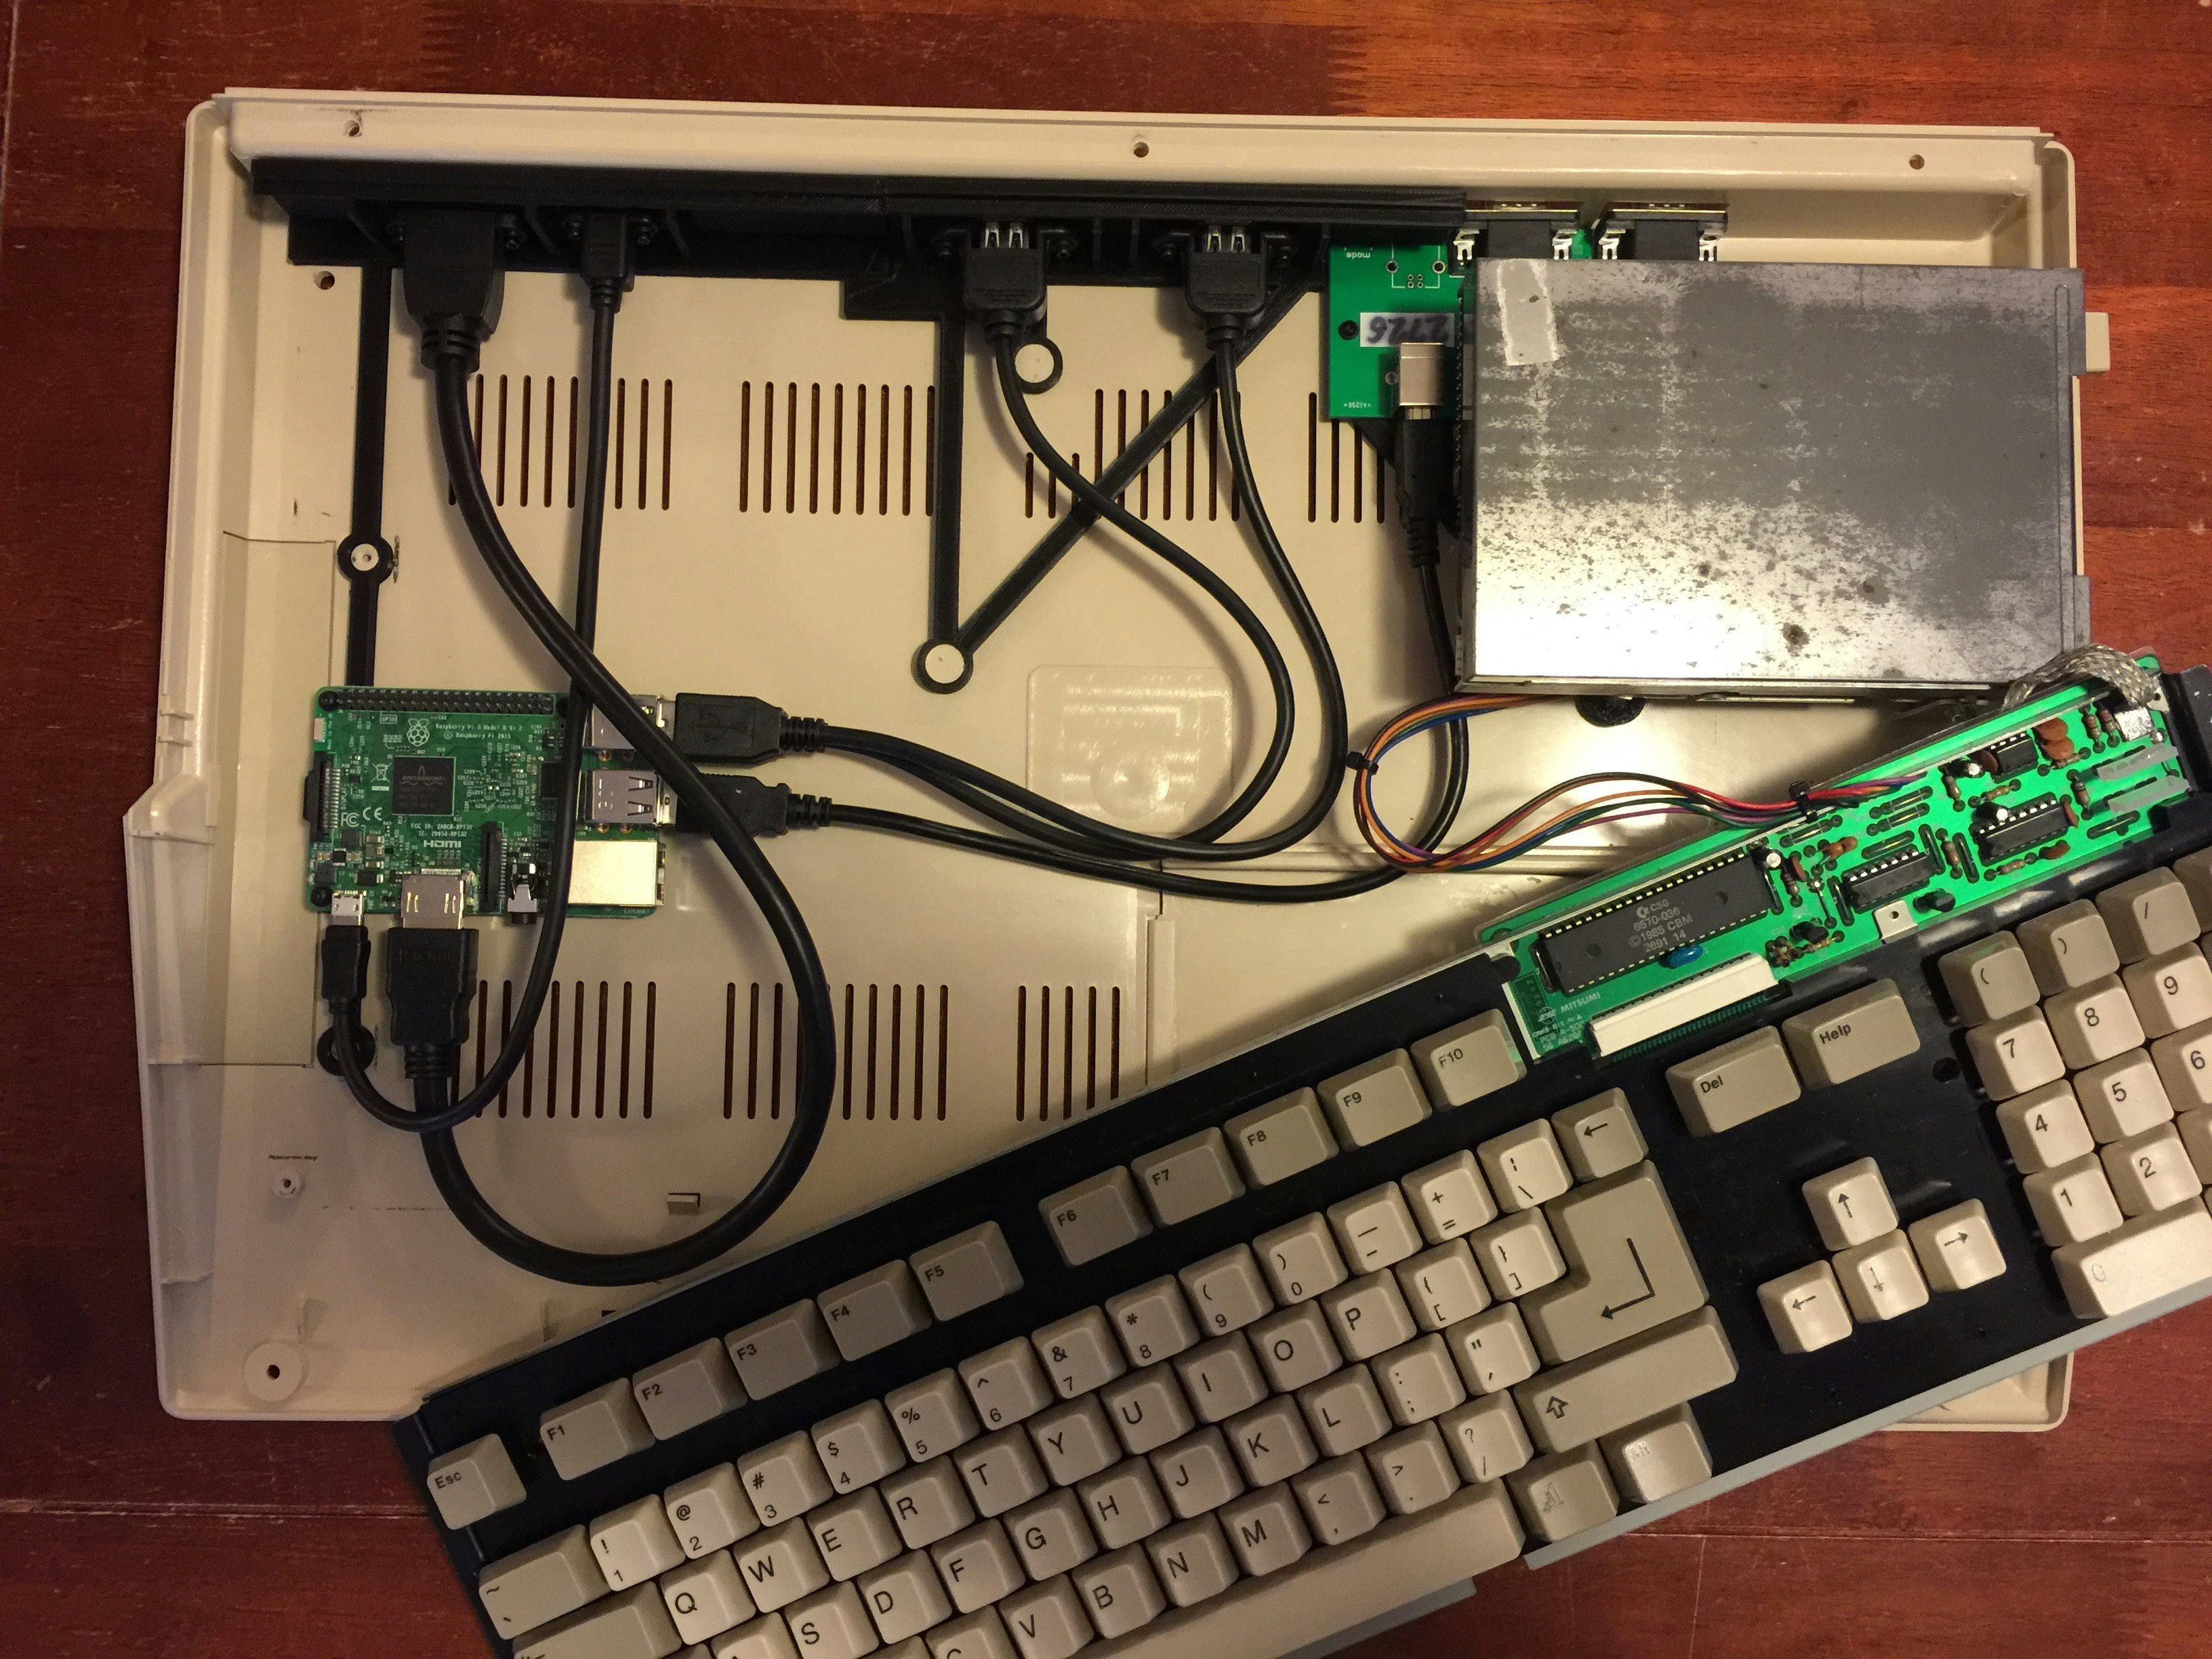 Fitting a Raspberry Pi into an Amiga 500 without Modifying the